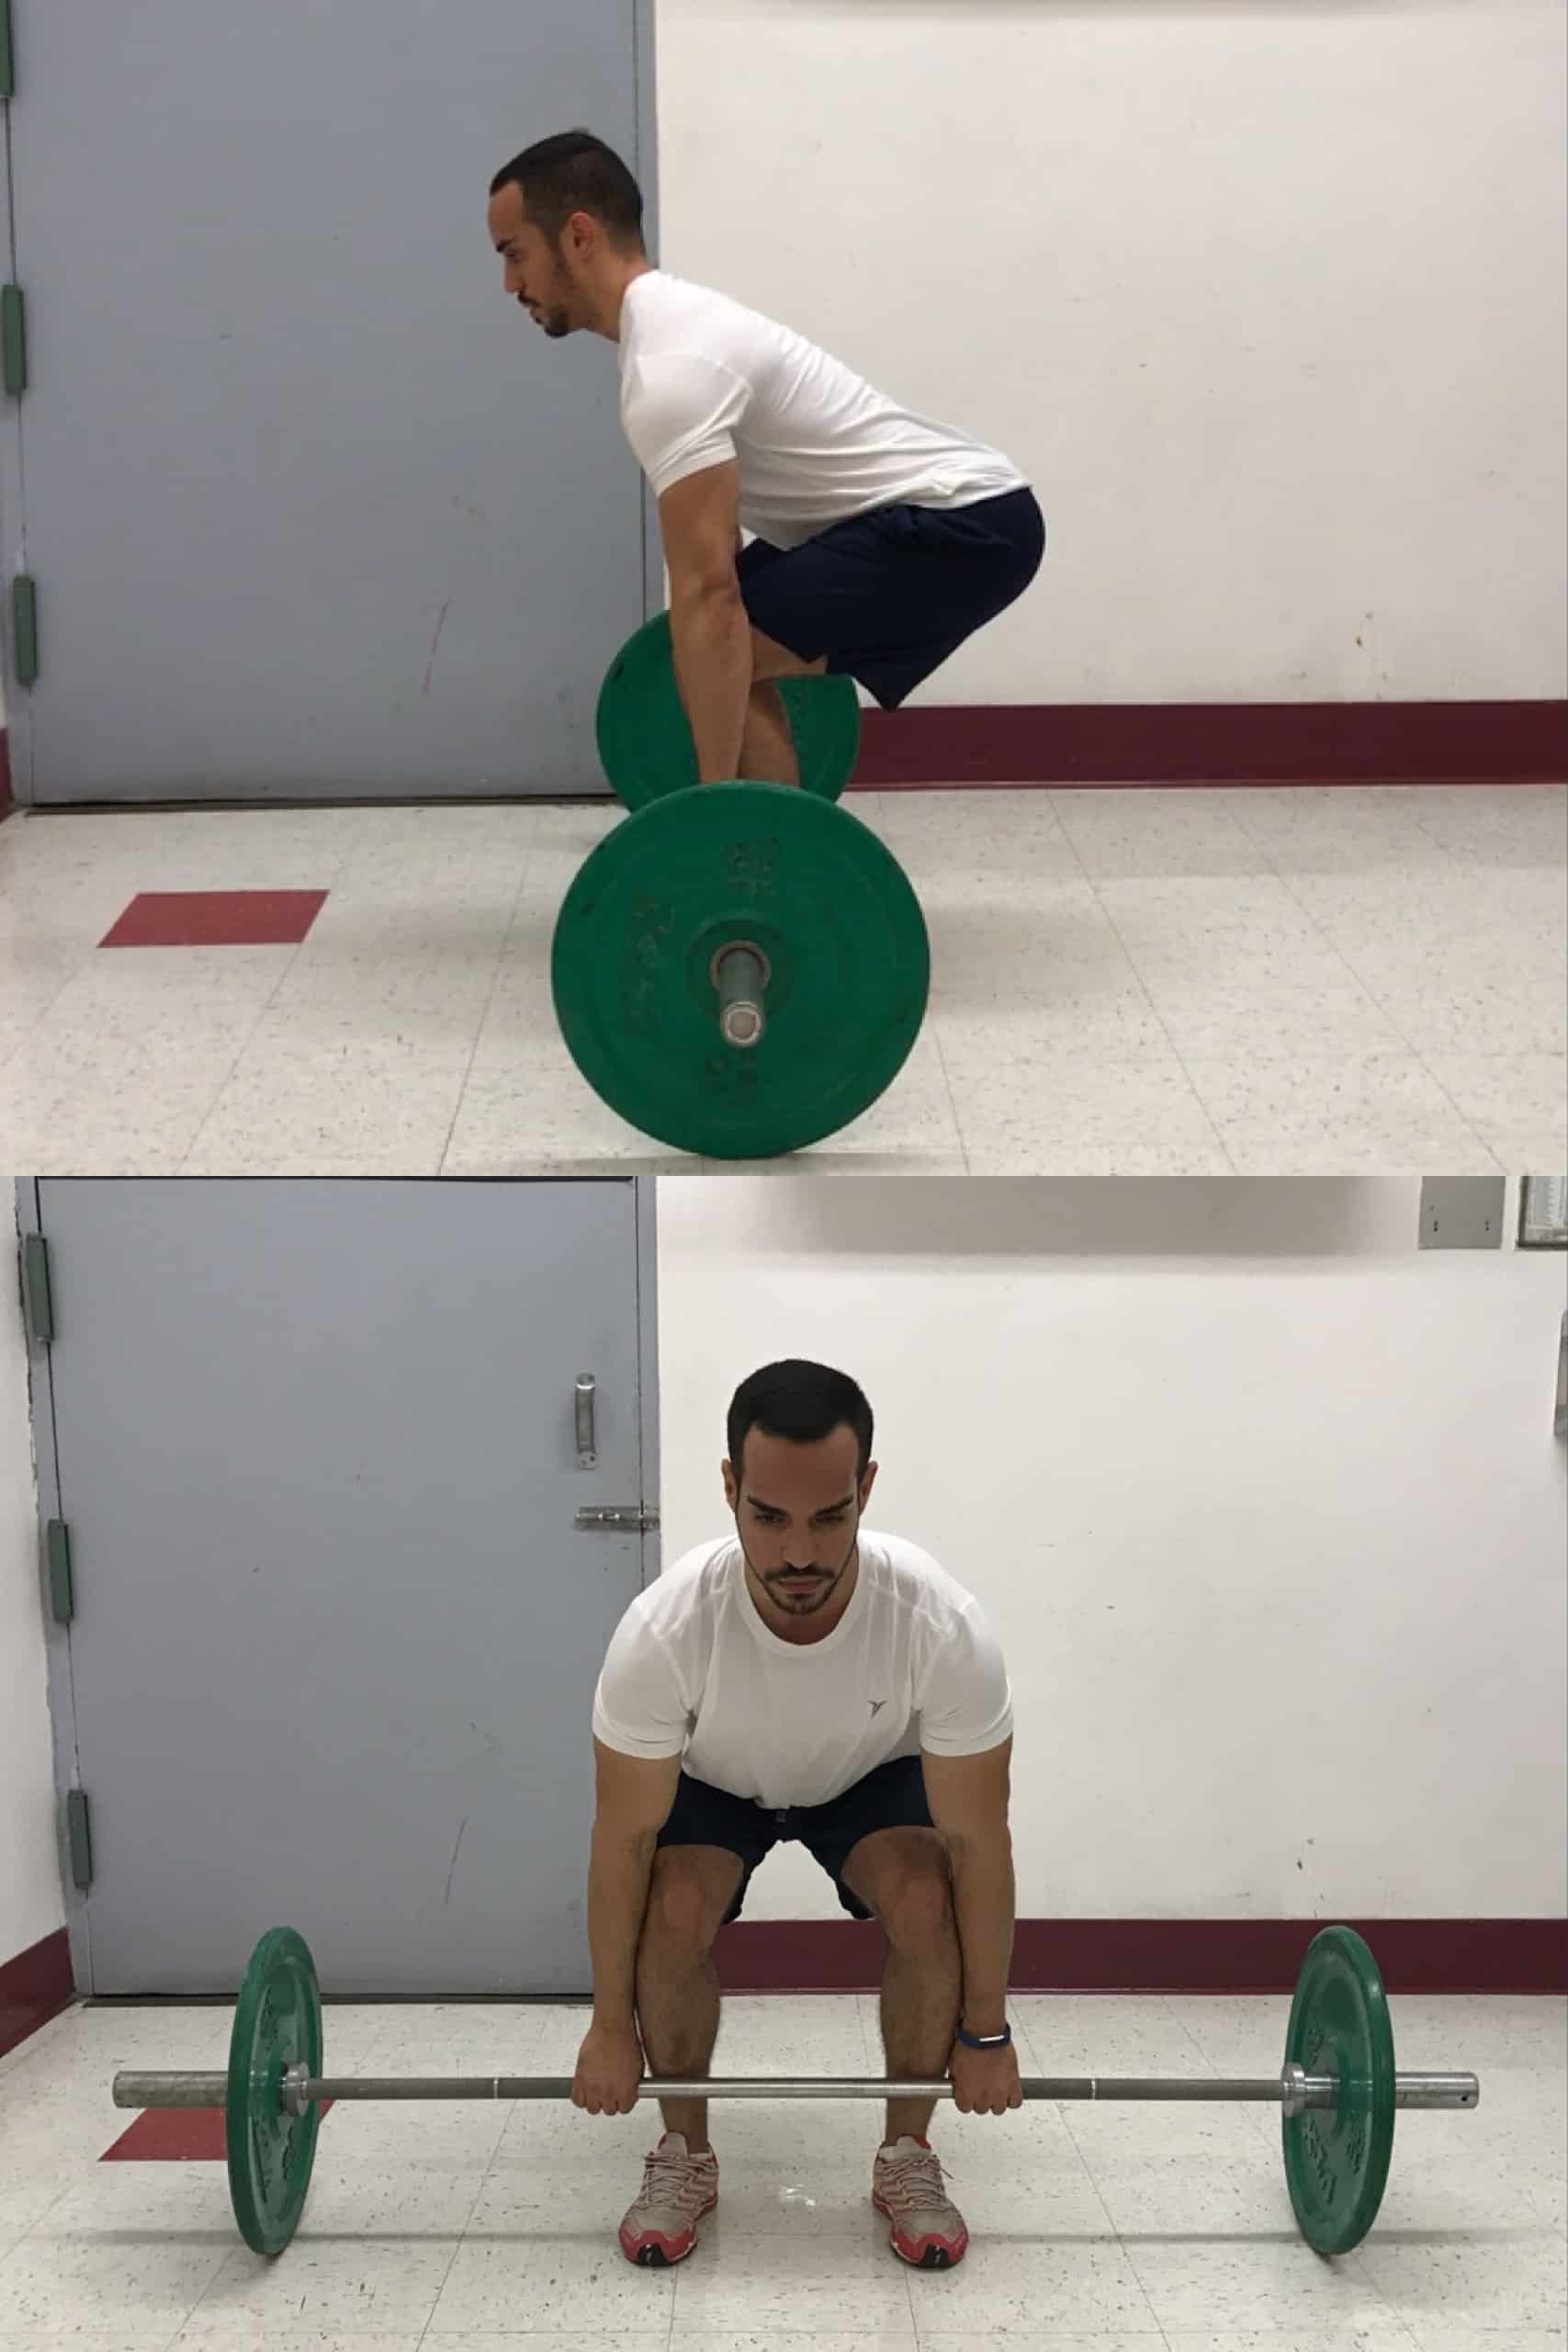 alex at the bottom position of the power clean which is the same as a deadlift bent over, grabbing the barbell with back flat shins vertical, neck neutral